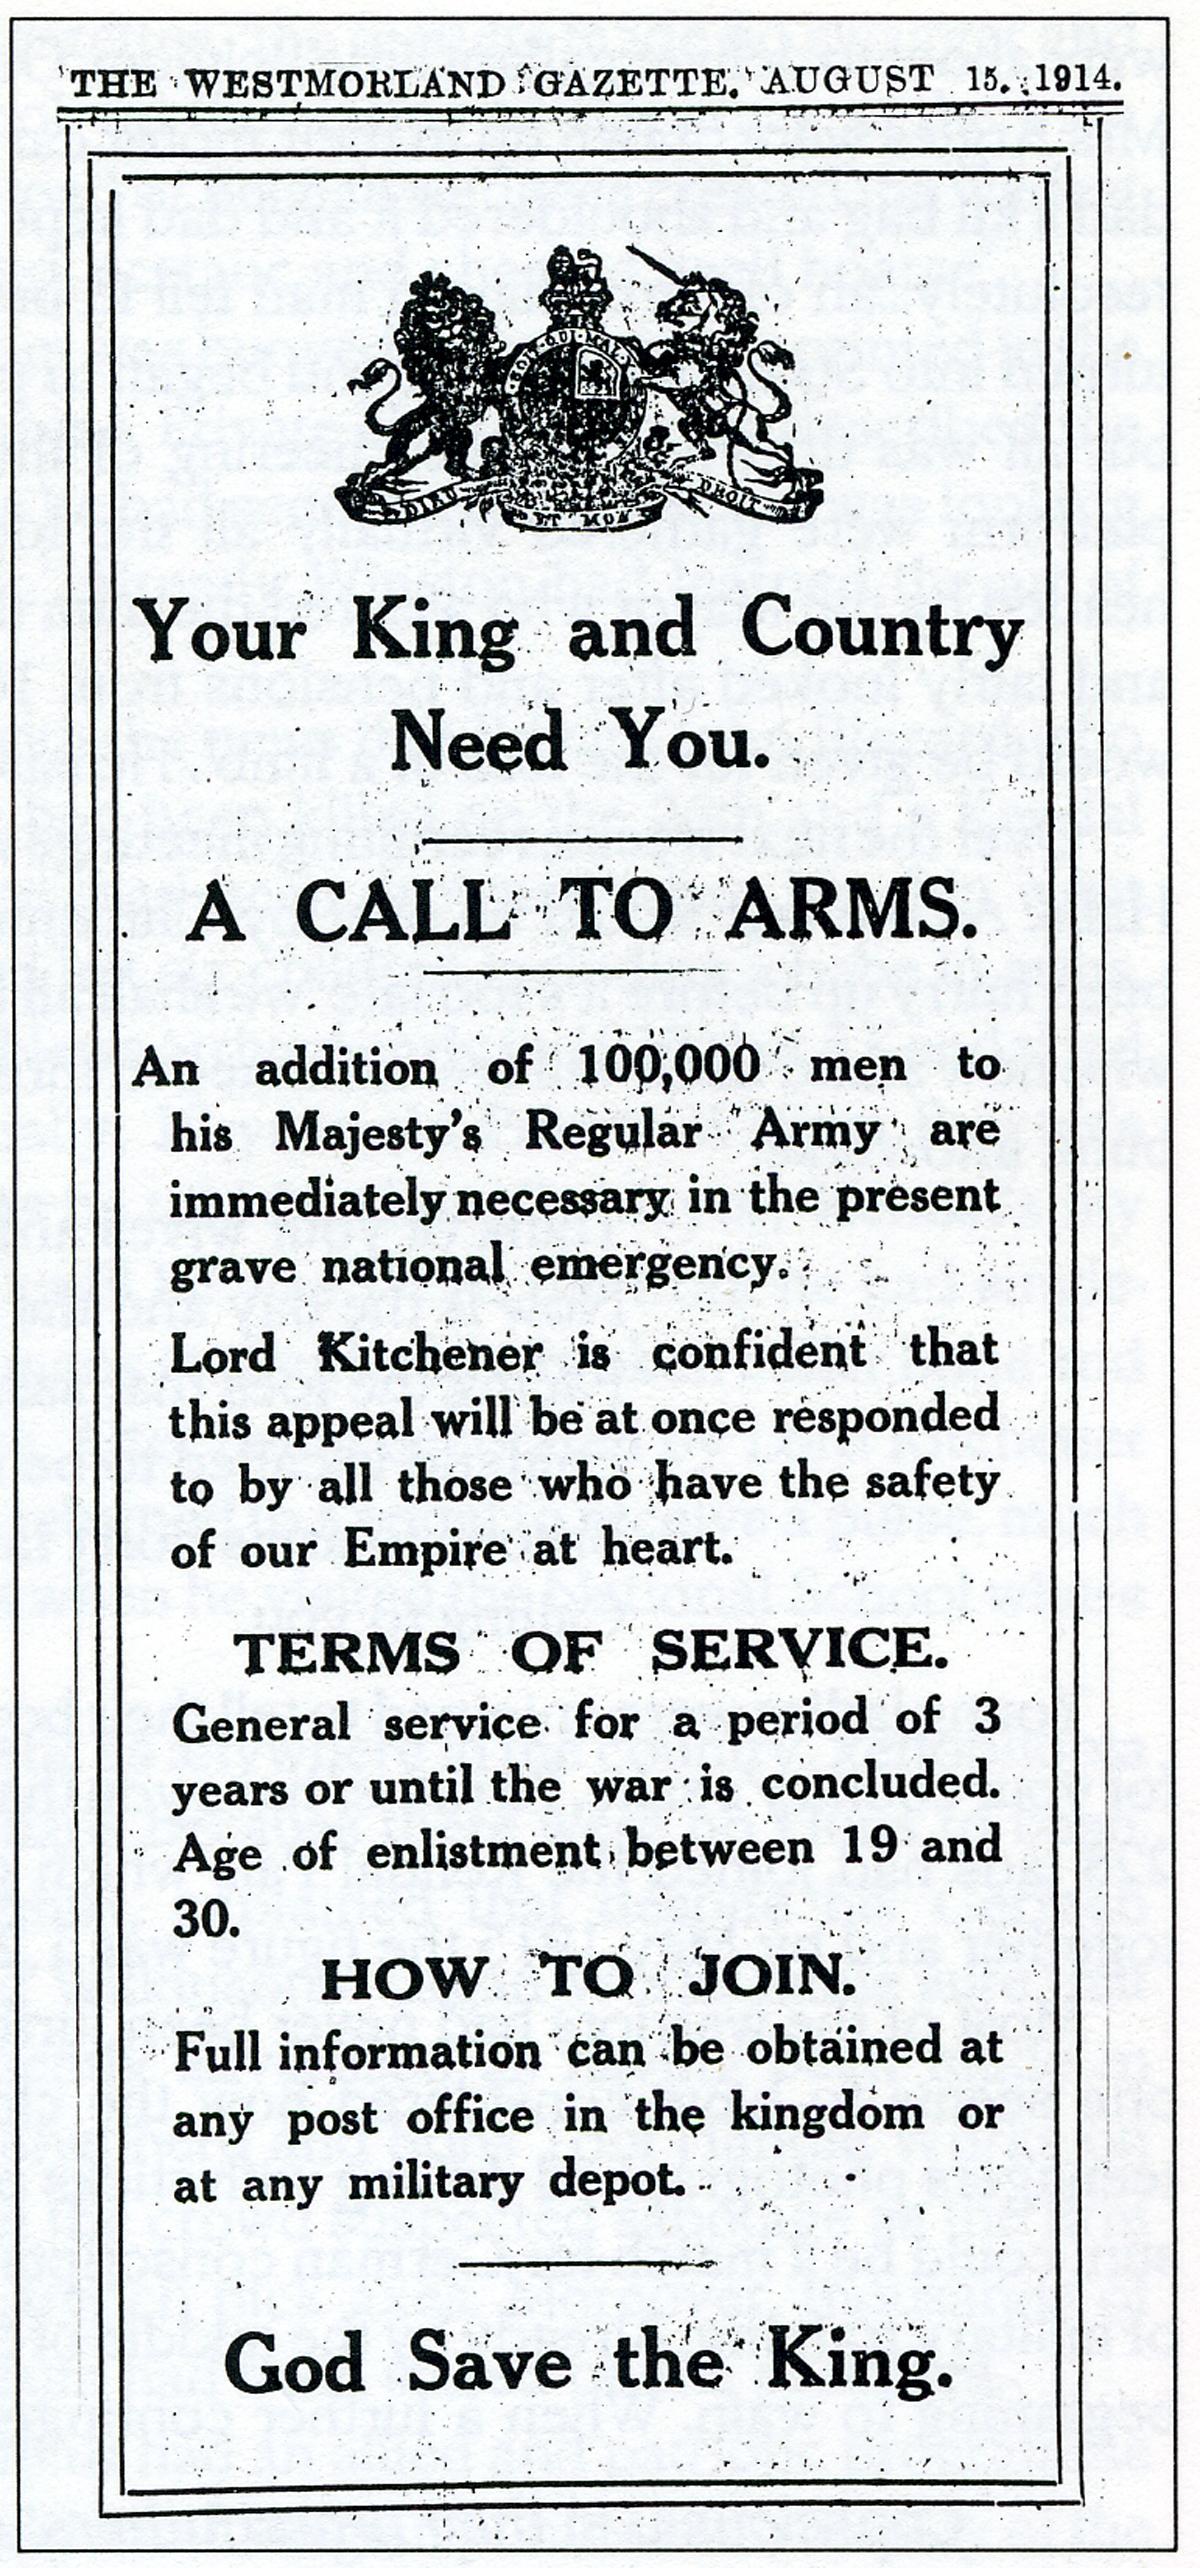 Recruiting poster from the Westmorland Gazette